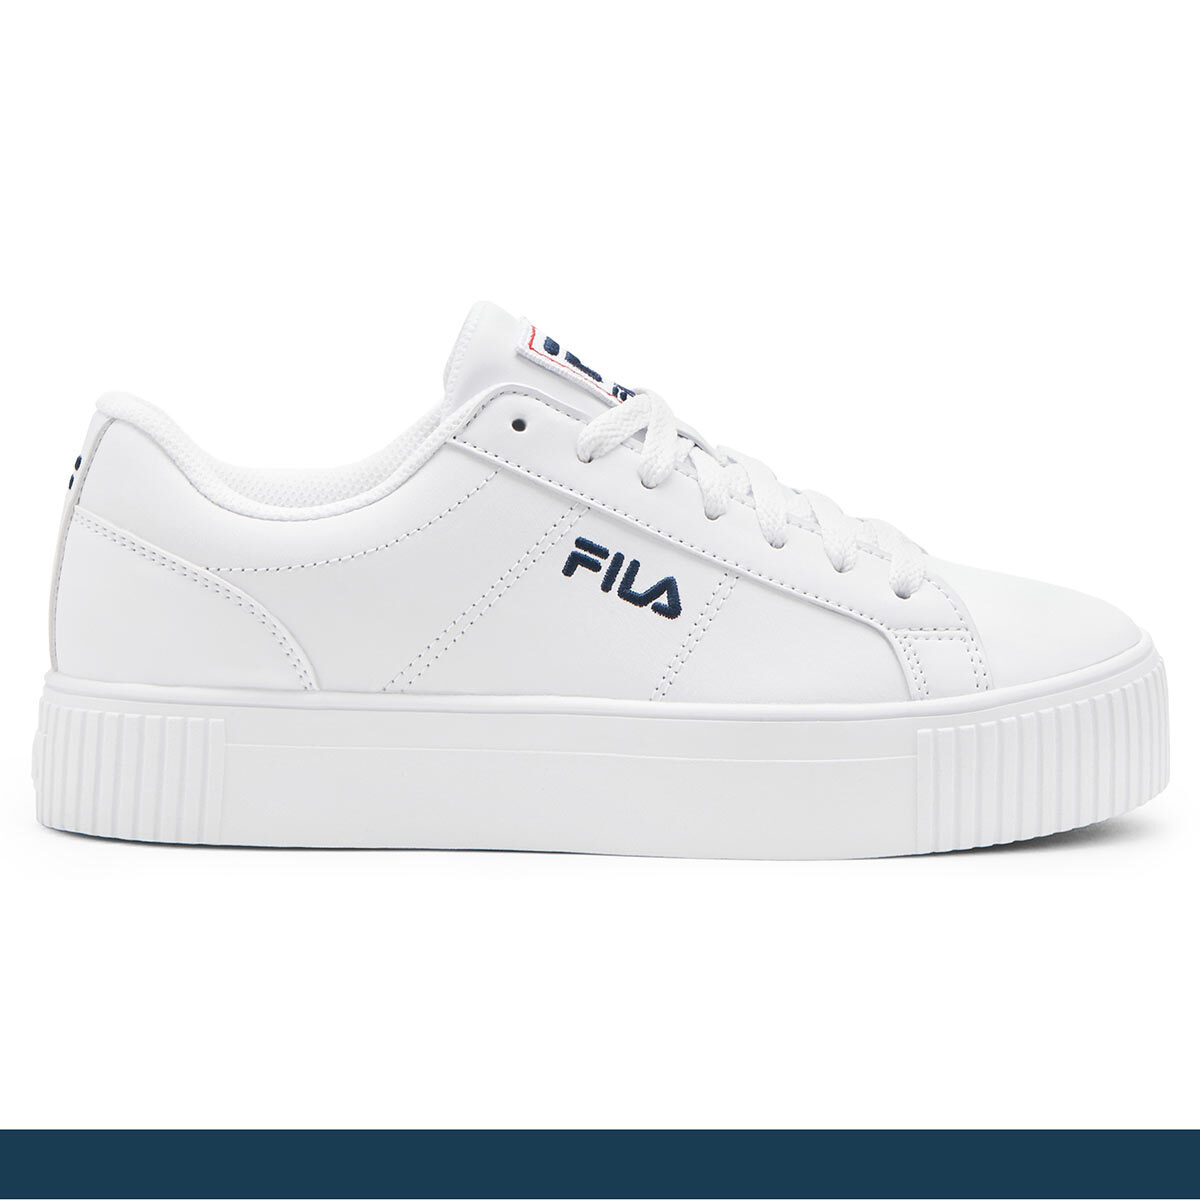 Fila Redmond Shoes in White and Sizes | UK